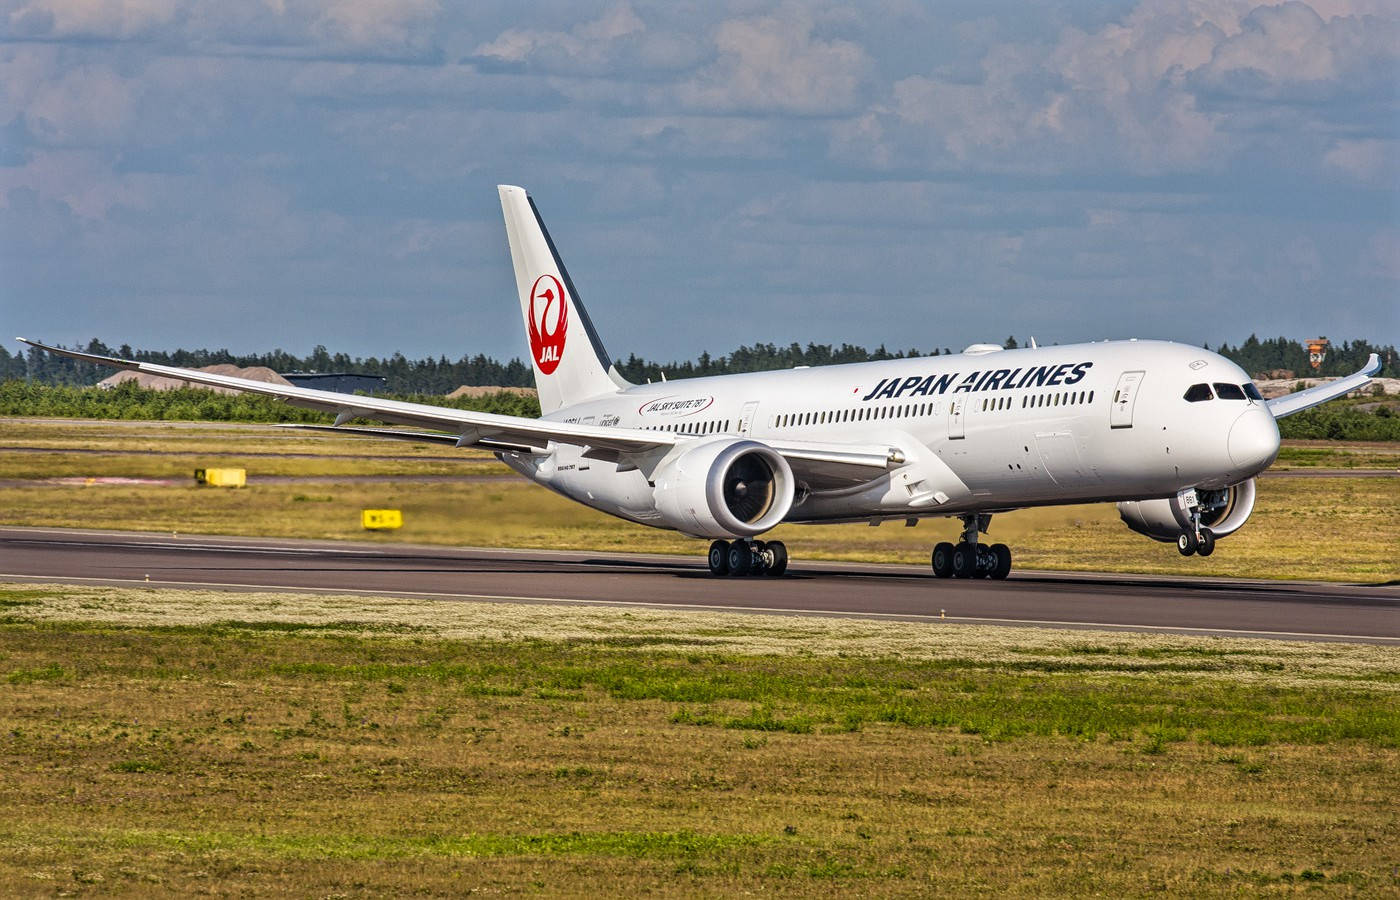 Japan Airlines Departure Taxiway Picture